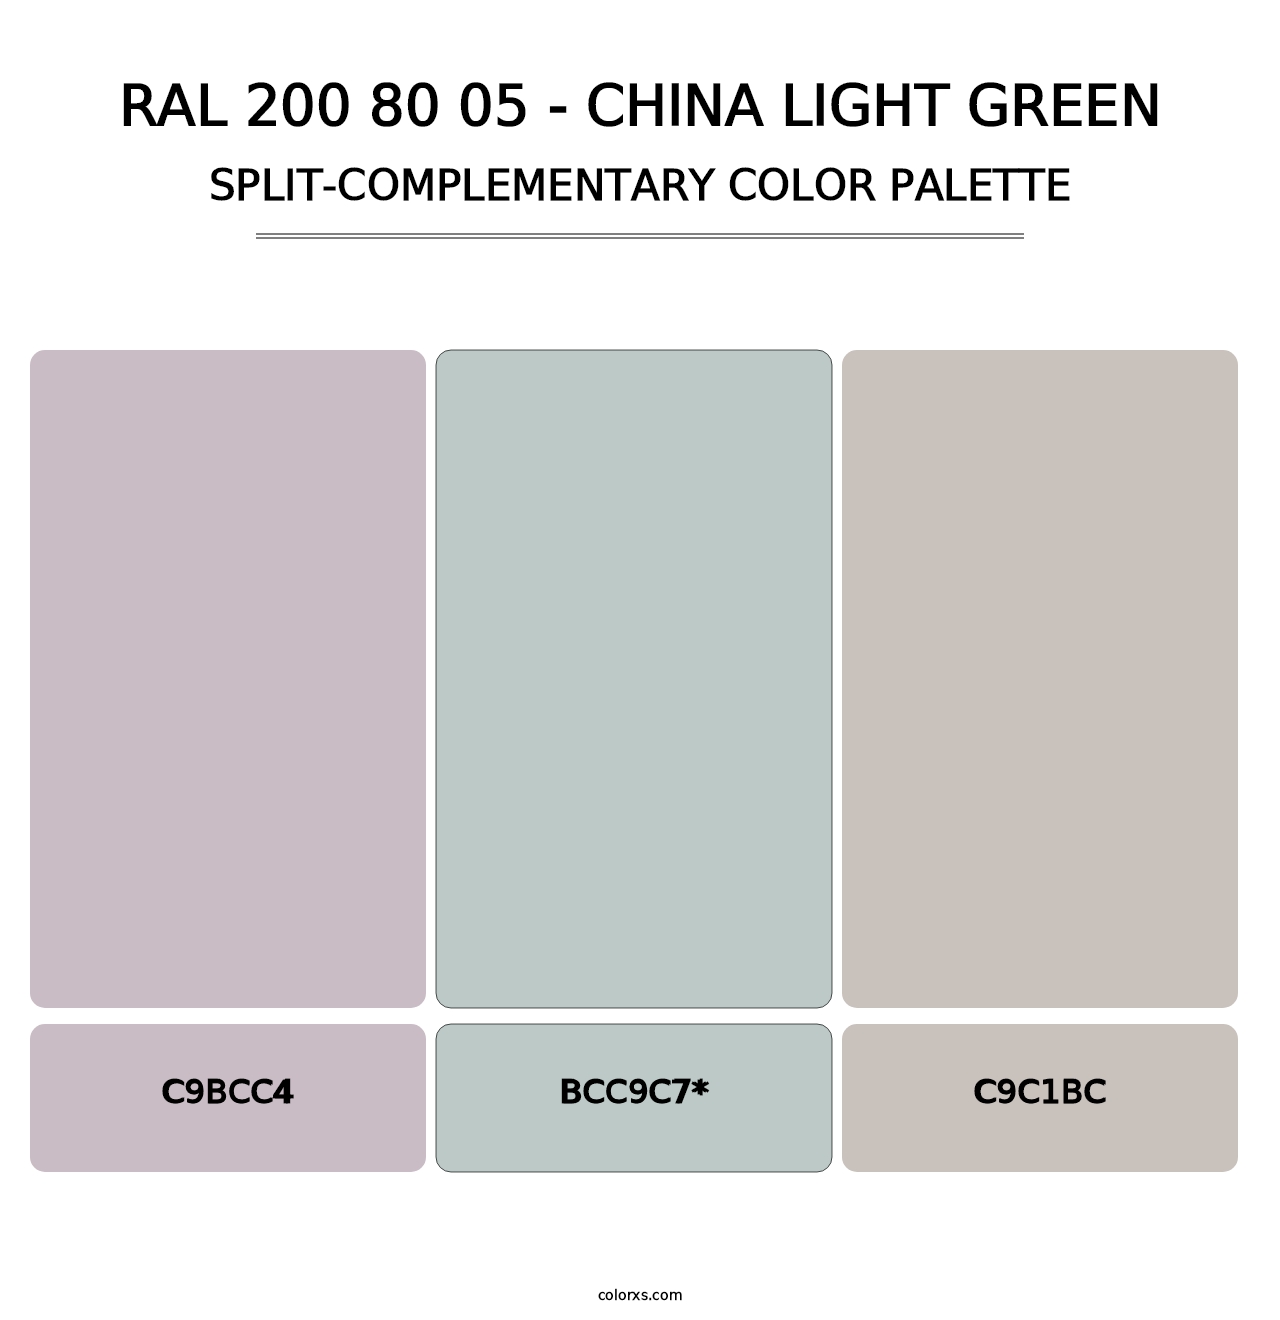 RAL 200 80 05 - China Light Green - Split-Complementary Color Palette